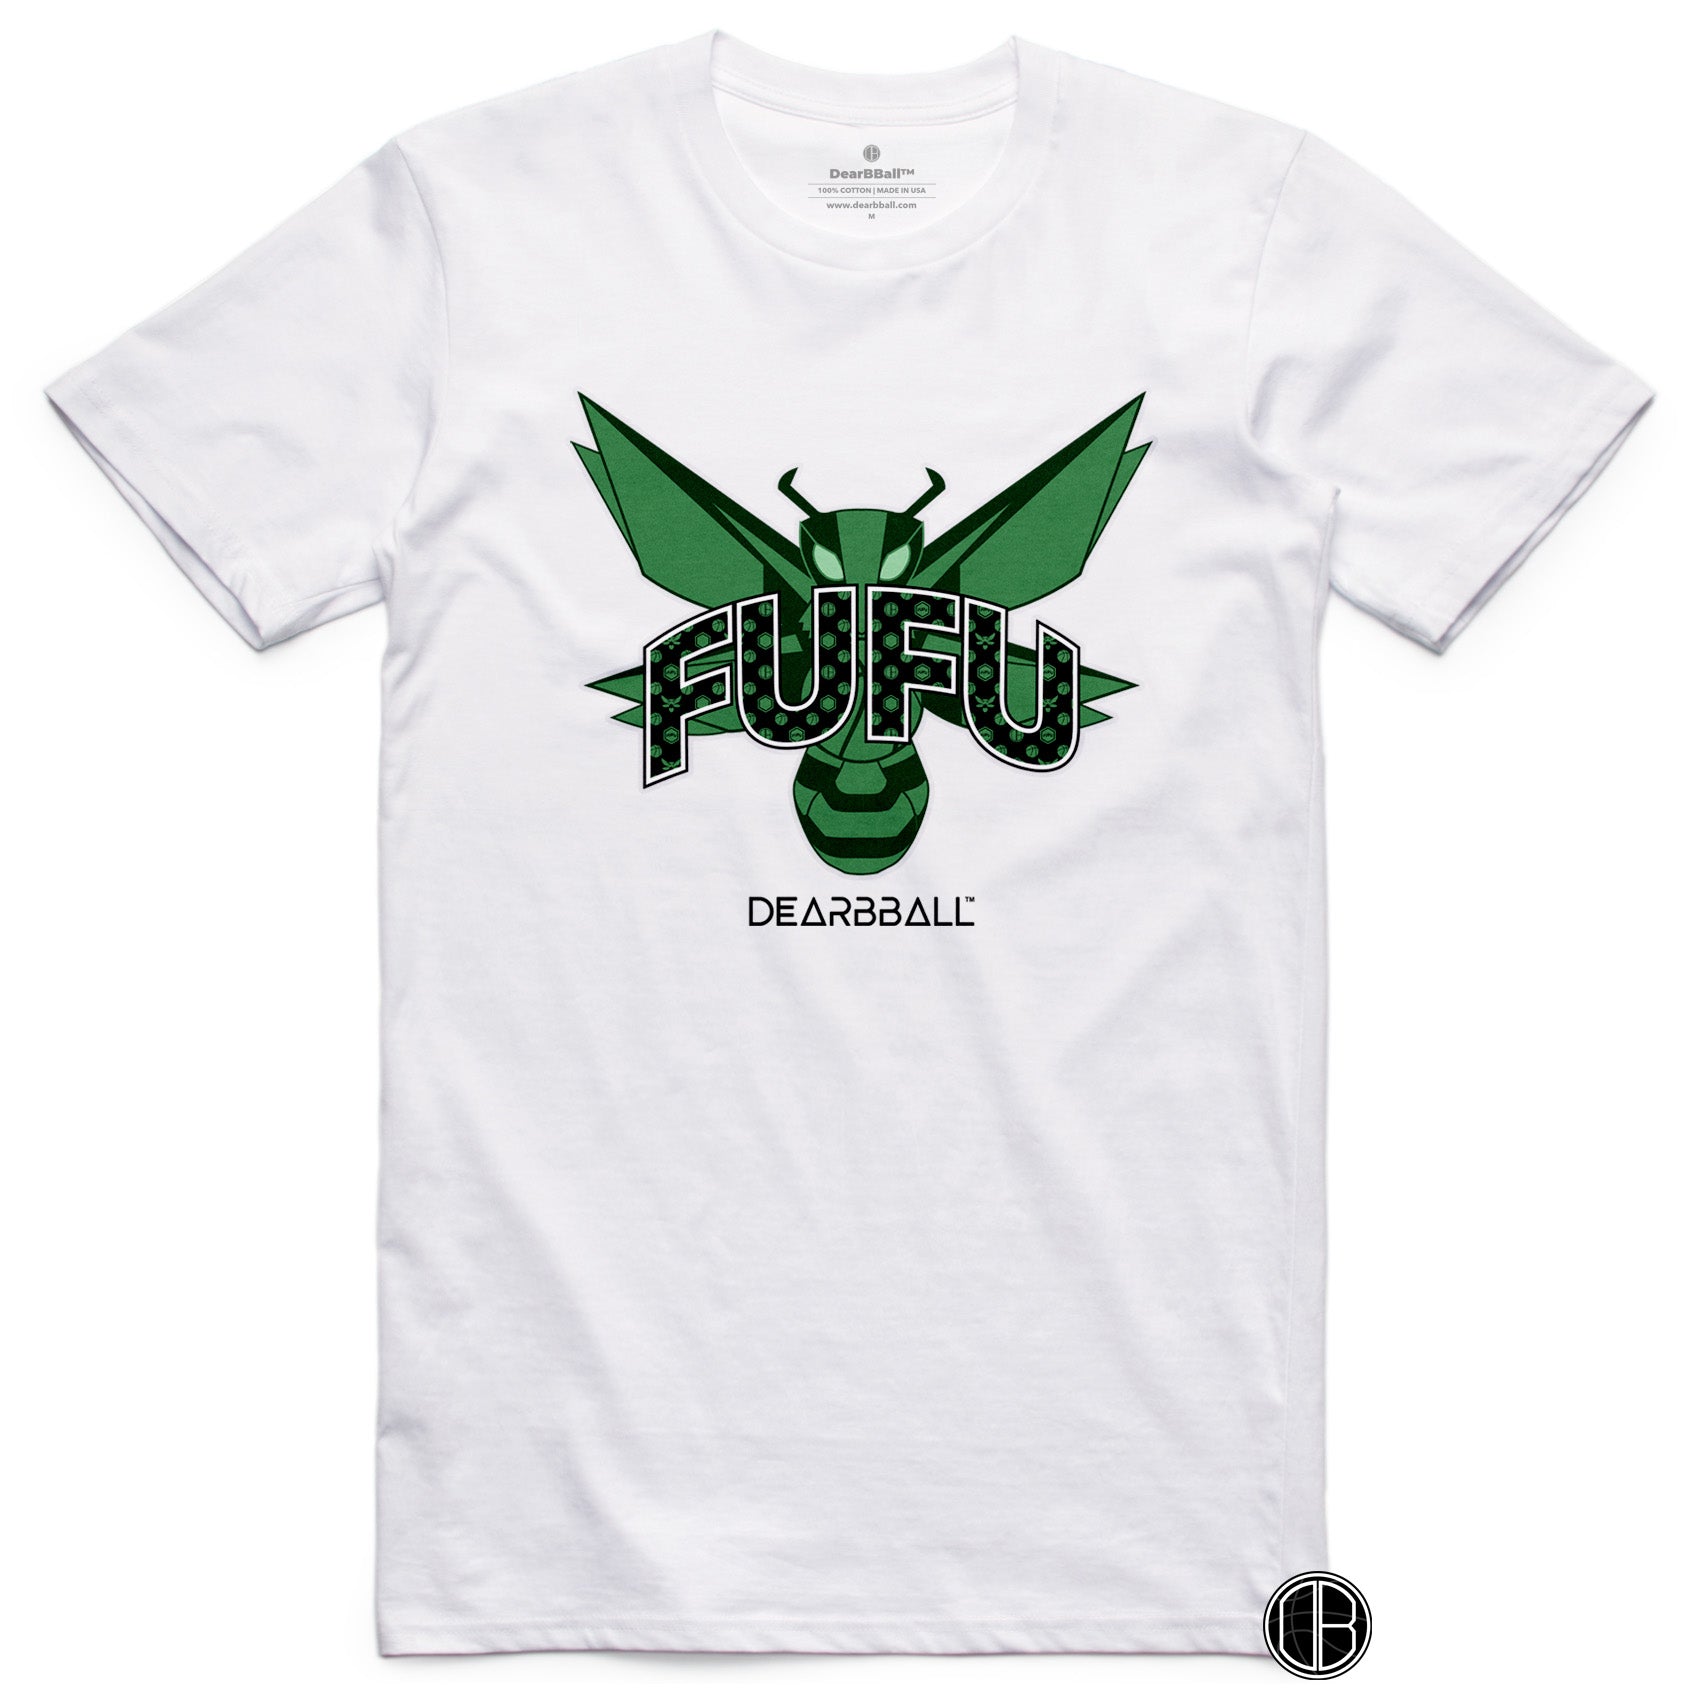 DearBBall T-Shirt - Bee FUFU Special